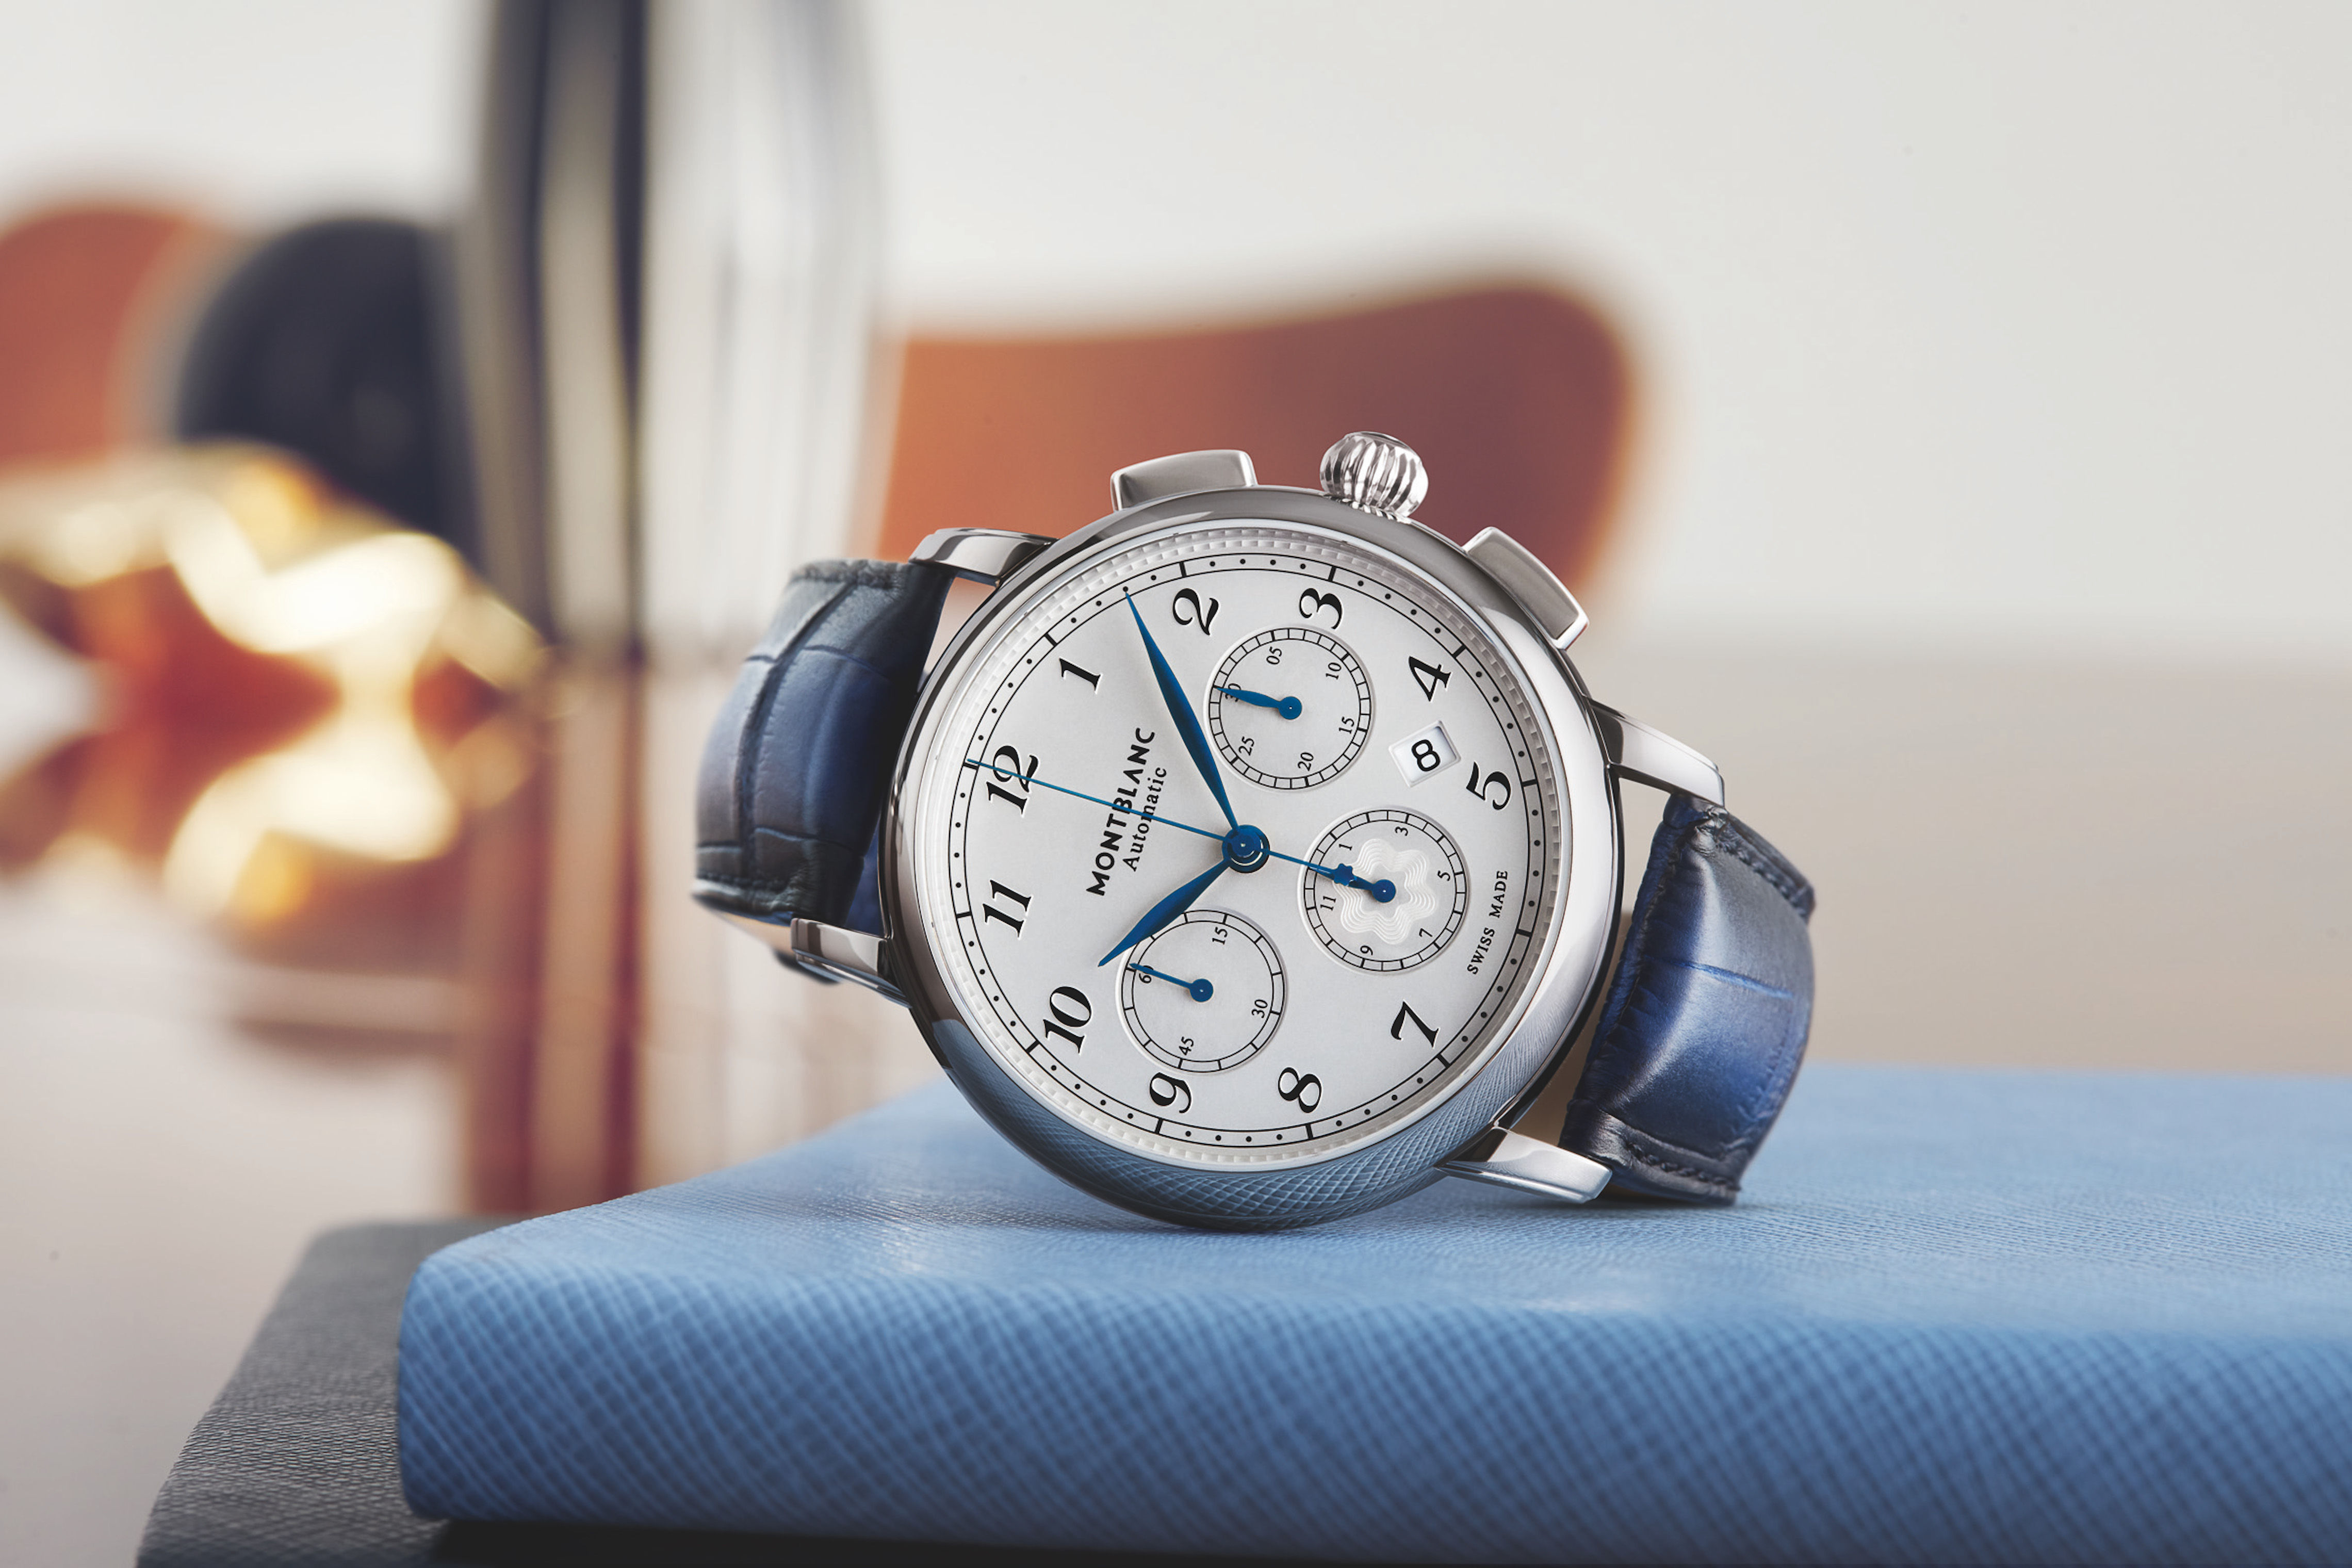 The new Montblanc Star Legacy shines with these highlights